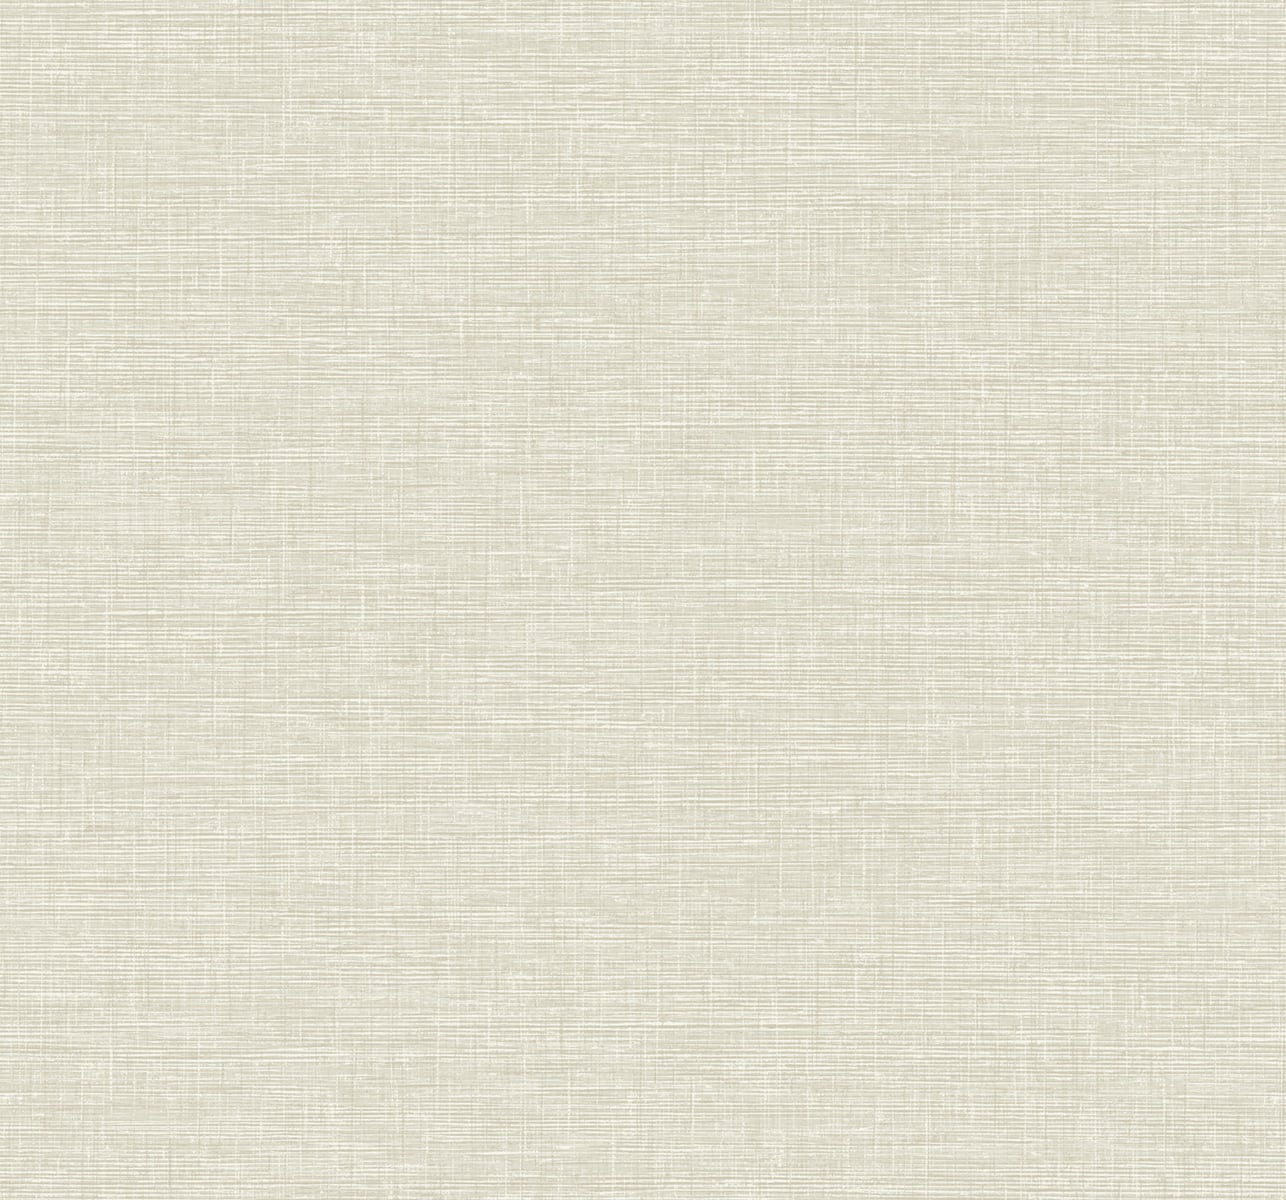 Seabrook Designs AW74007 Casa Blanca 2 Linen Weave  Wallpaper Beige and Off-White